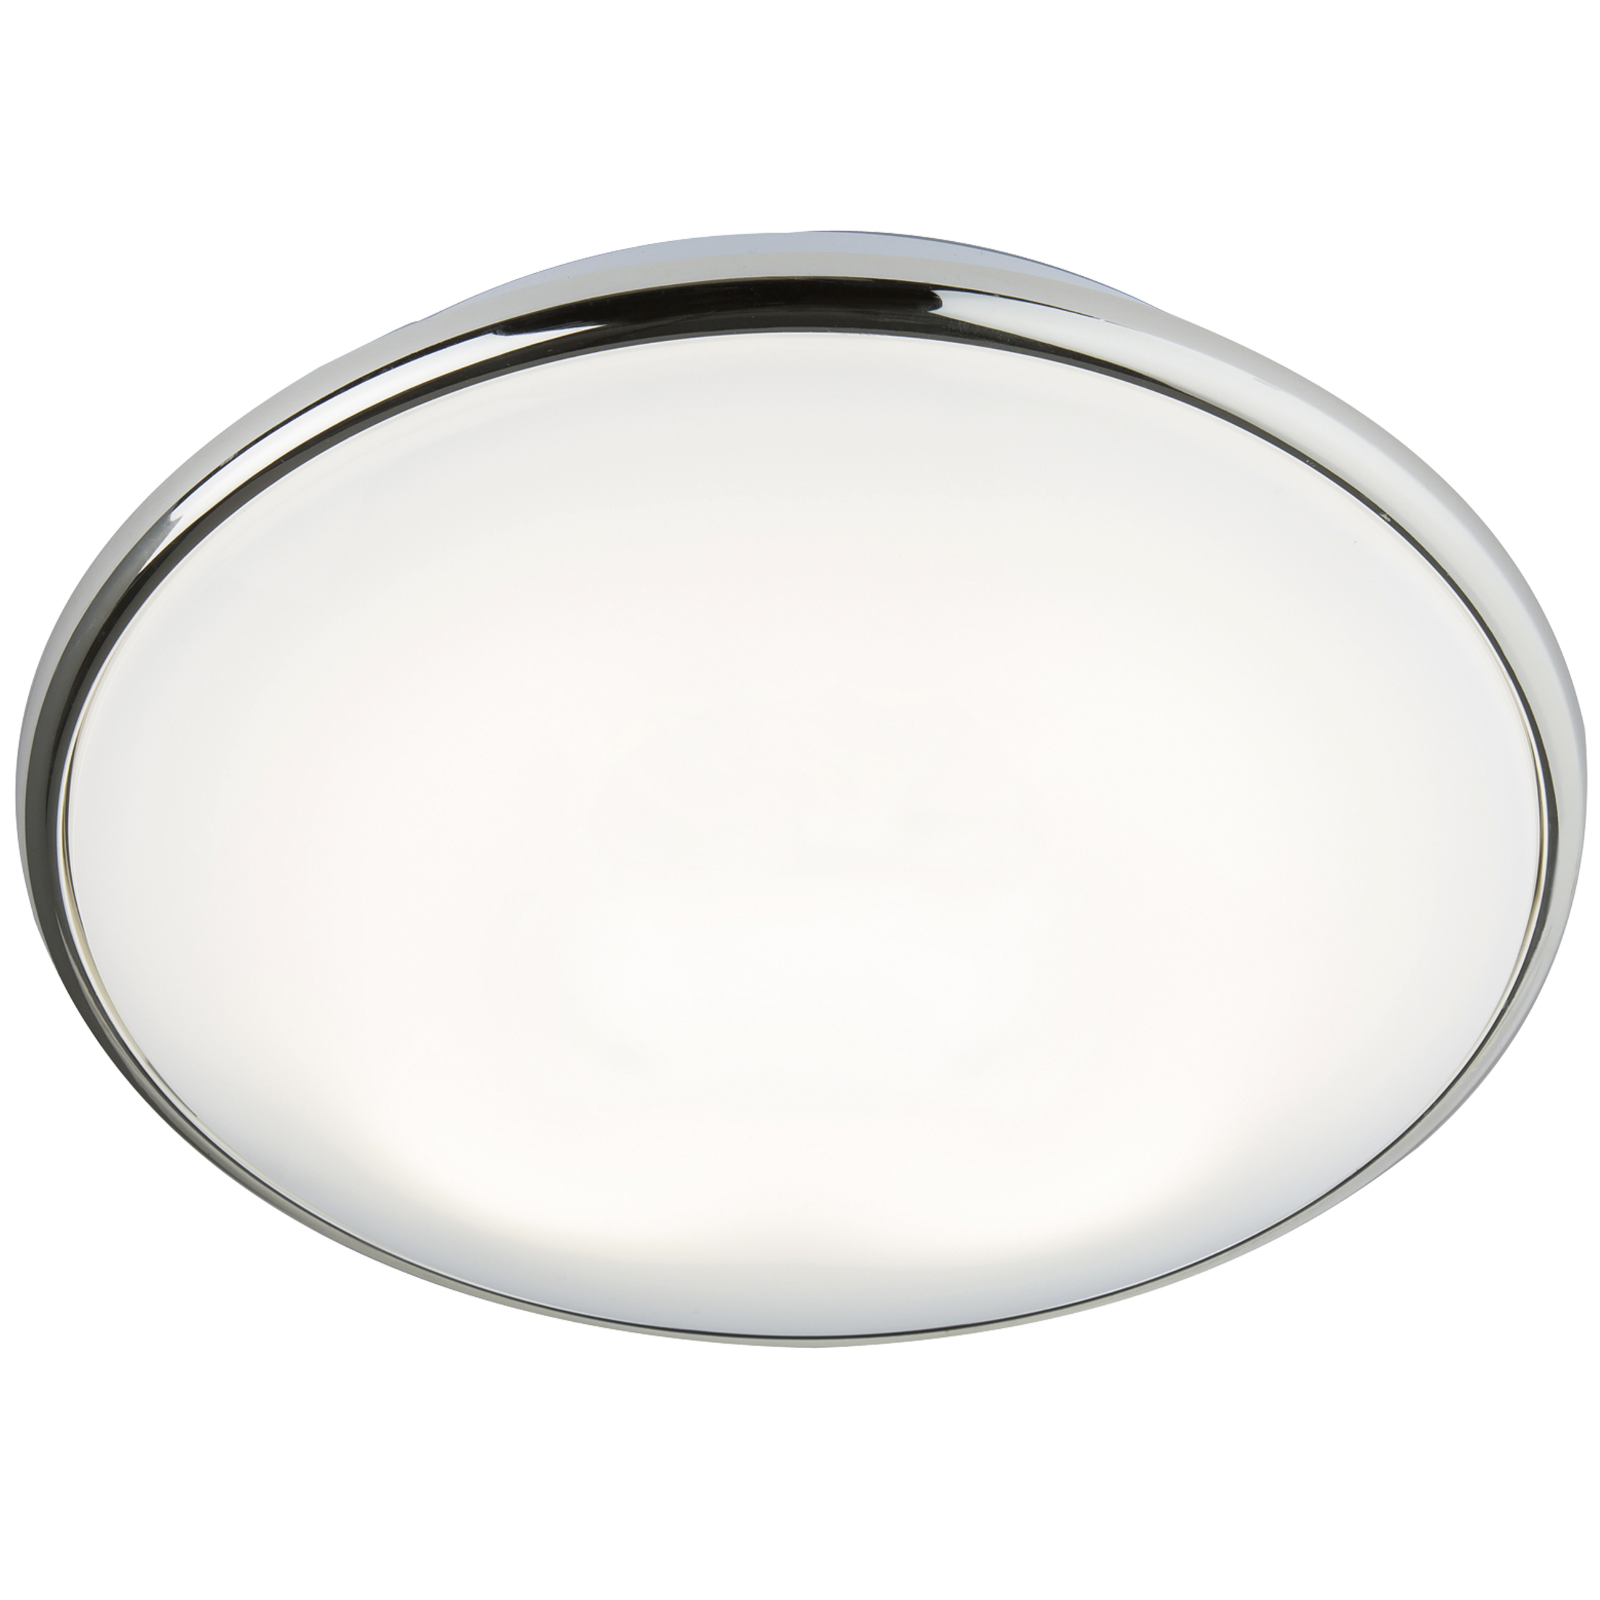 IP20 38W 2D HF Bulkhead With Opal Diffuser And Chrome Base - TP38W2DCHF 